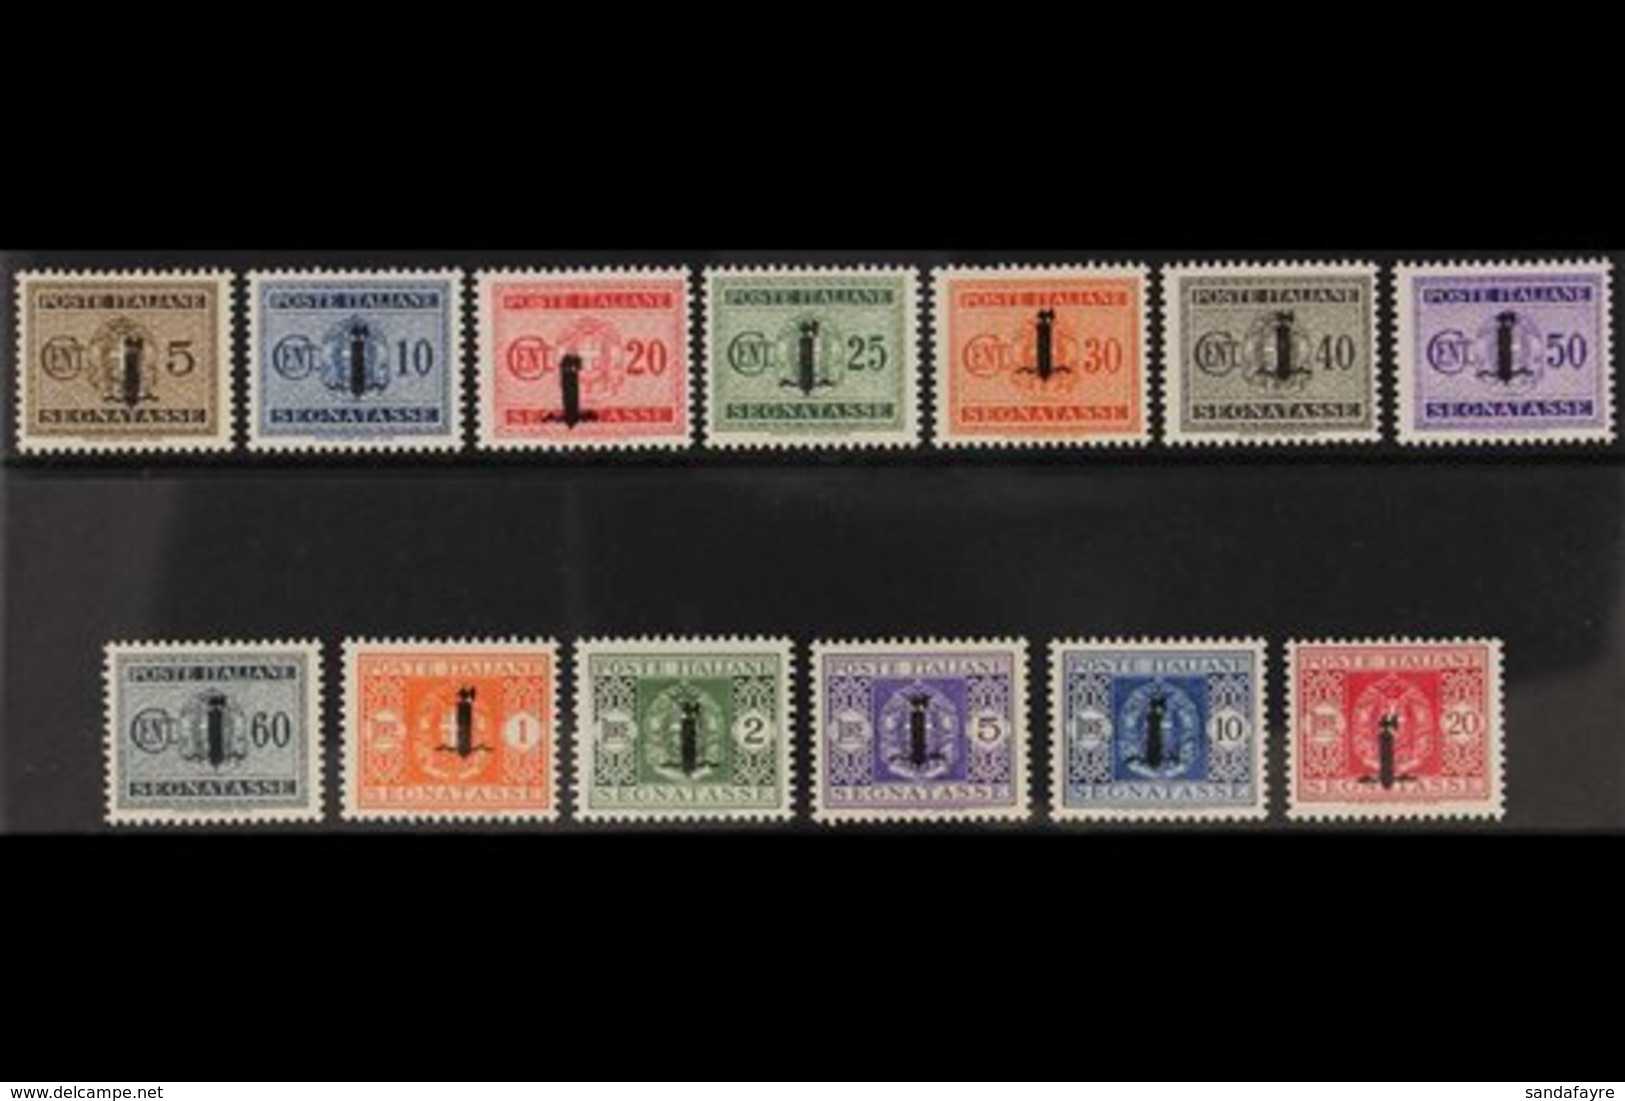 POSTAGE DUES ITALIAN SOCIAL REPUBLIC 1944 Overprints Complete Set (Sassone 60/72, SG D89/101), Never Hinged Mint, Fresh. - Sin Clasificación